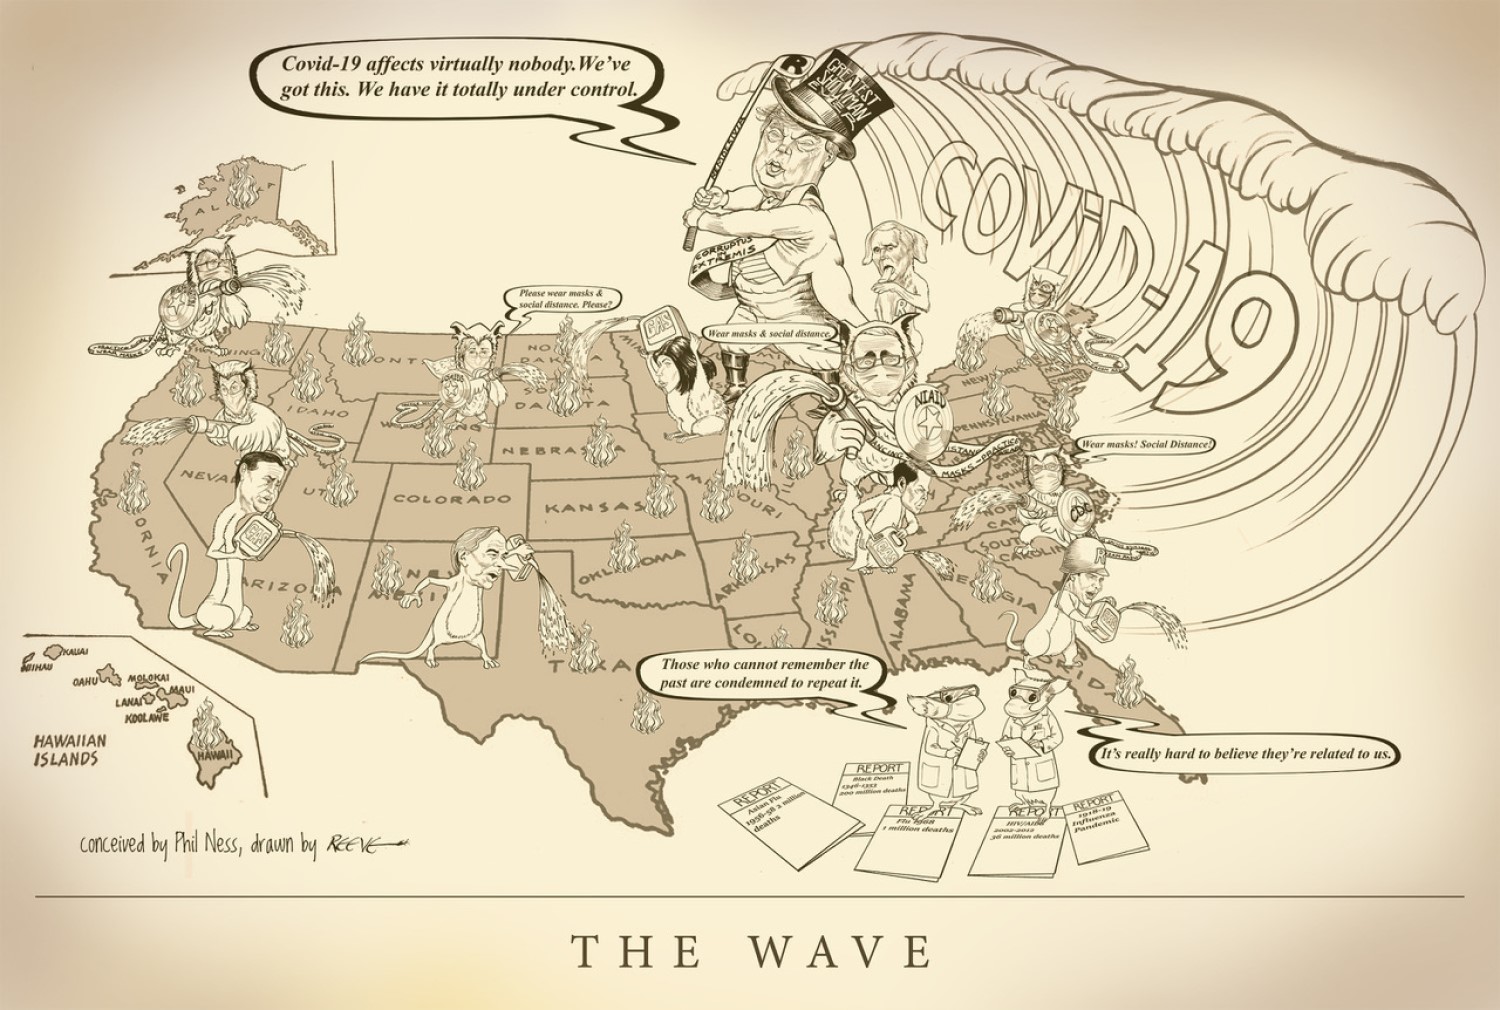 Cartoon: The Wave, conceived by Phil Ness, drawn by Reeve, 2021.